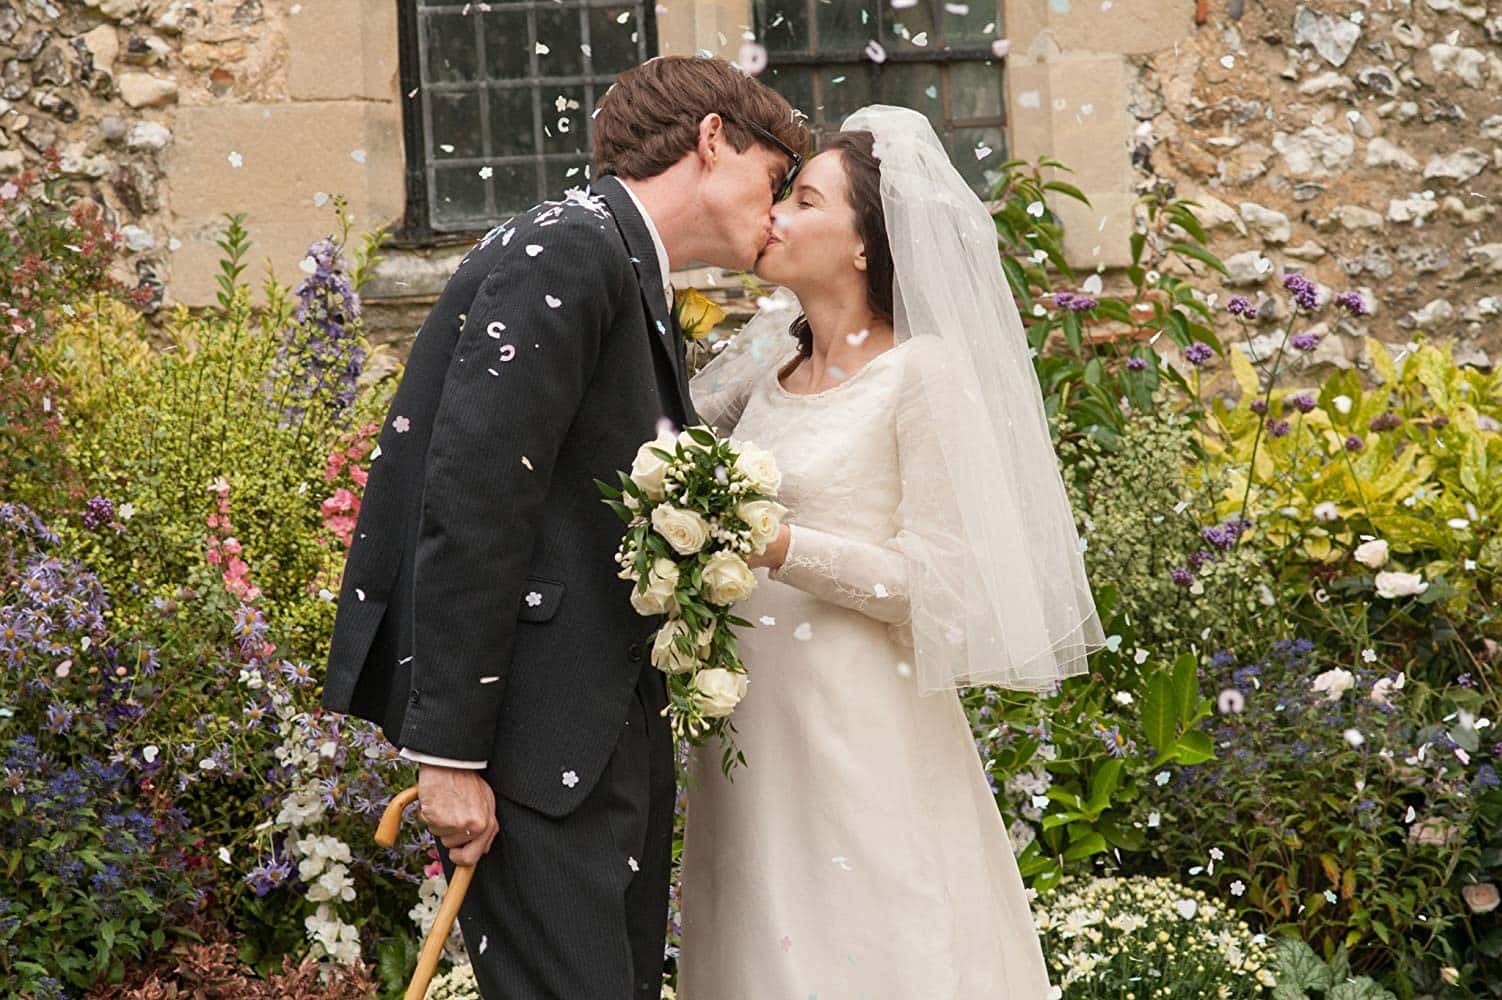 Eddie Redmayne and Felicity Jones portray Stephen Hawking and Jane Wilde on their wedding day. As they leave the church, they share a quick kiss.